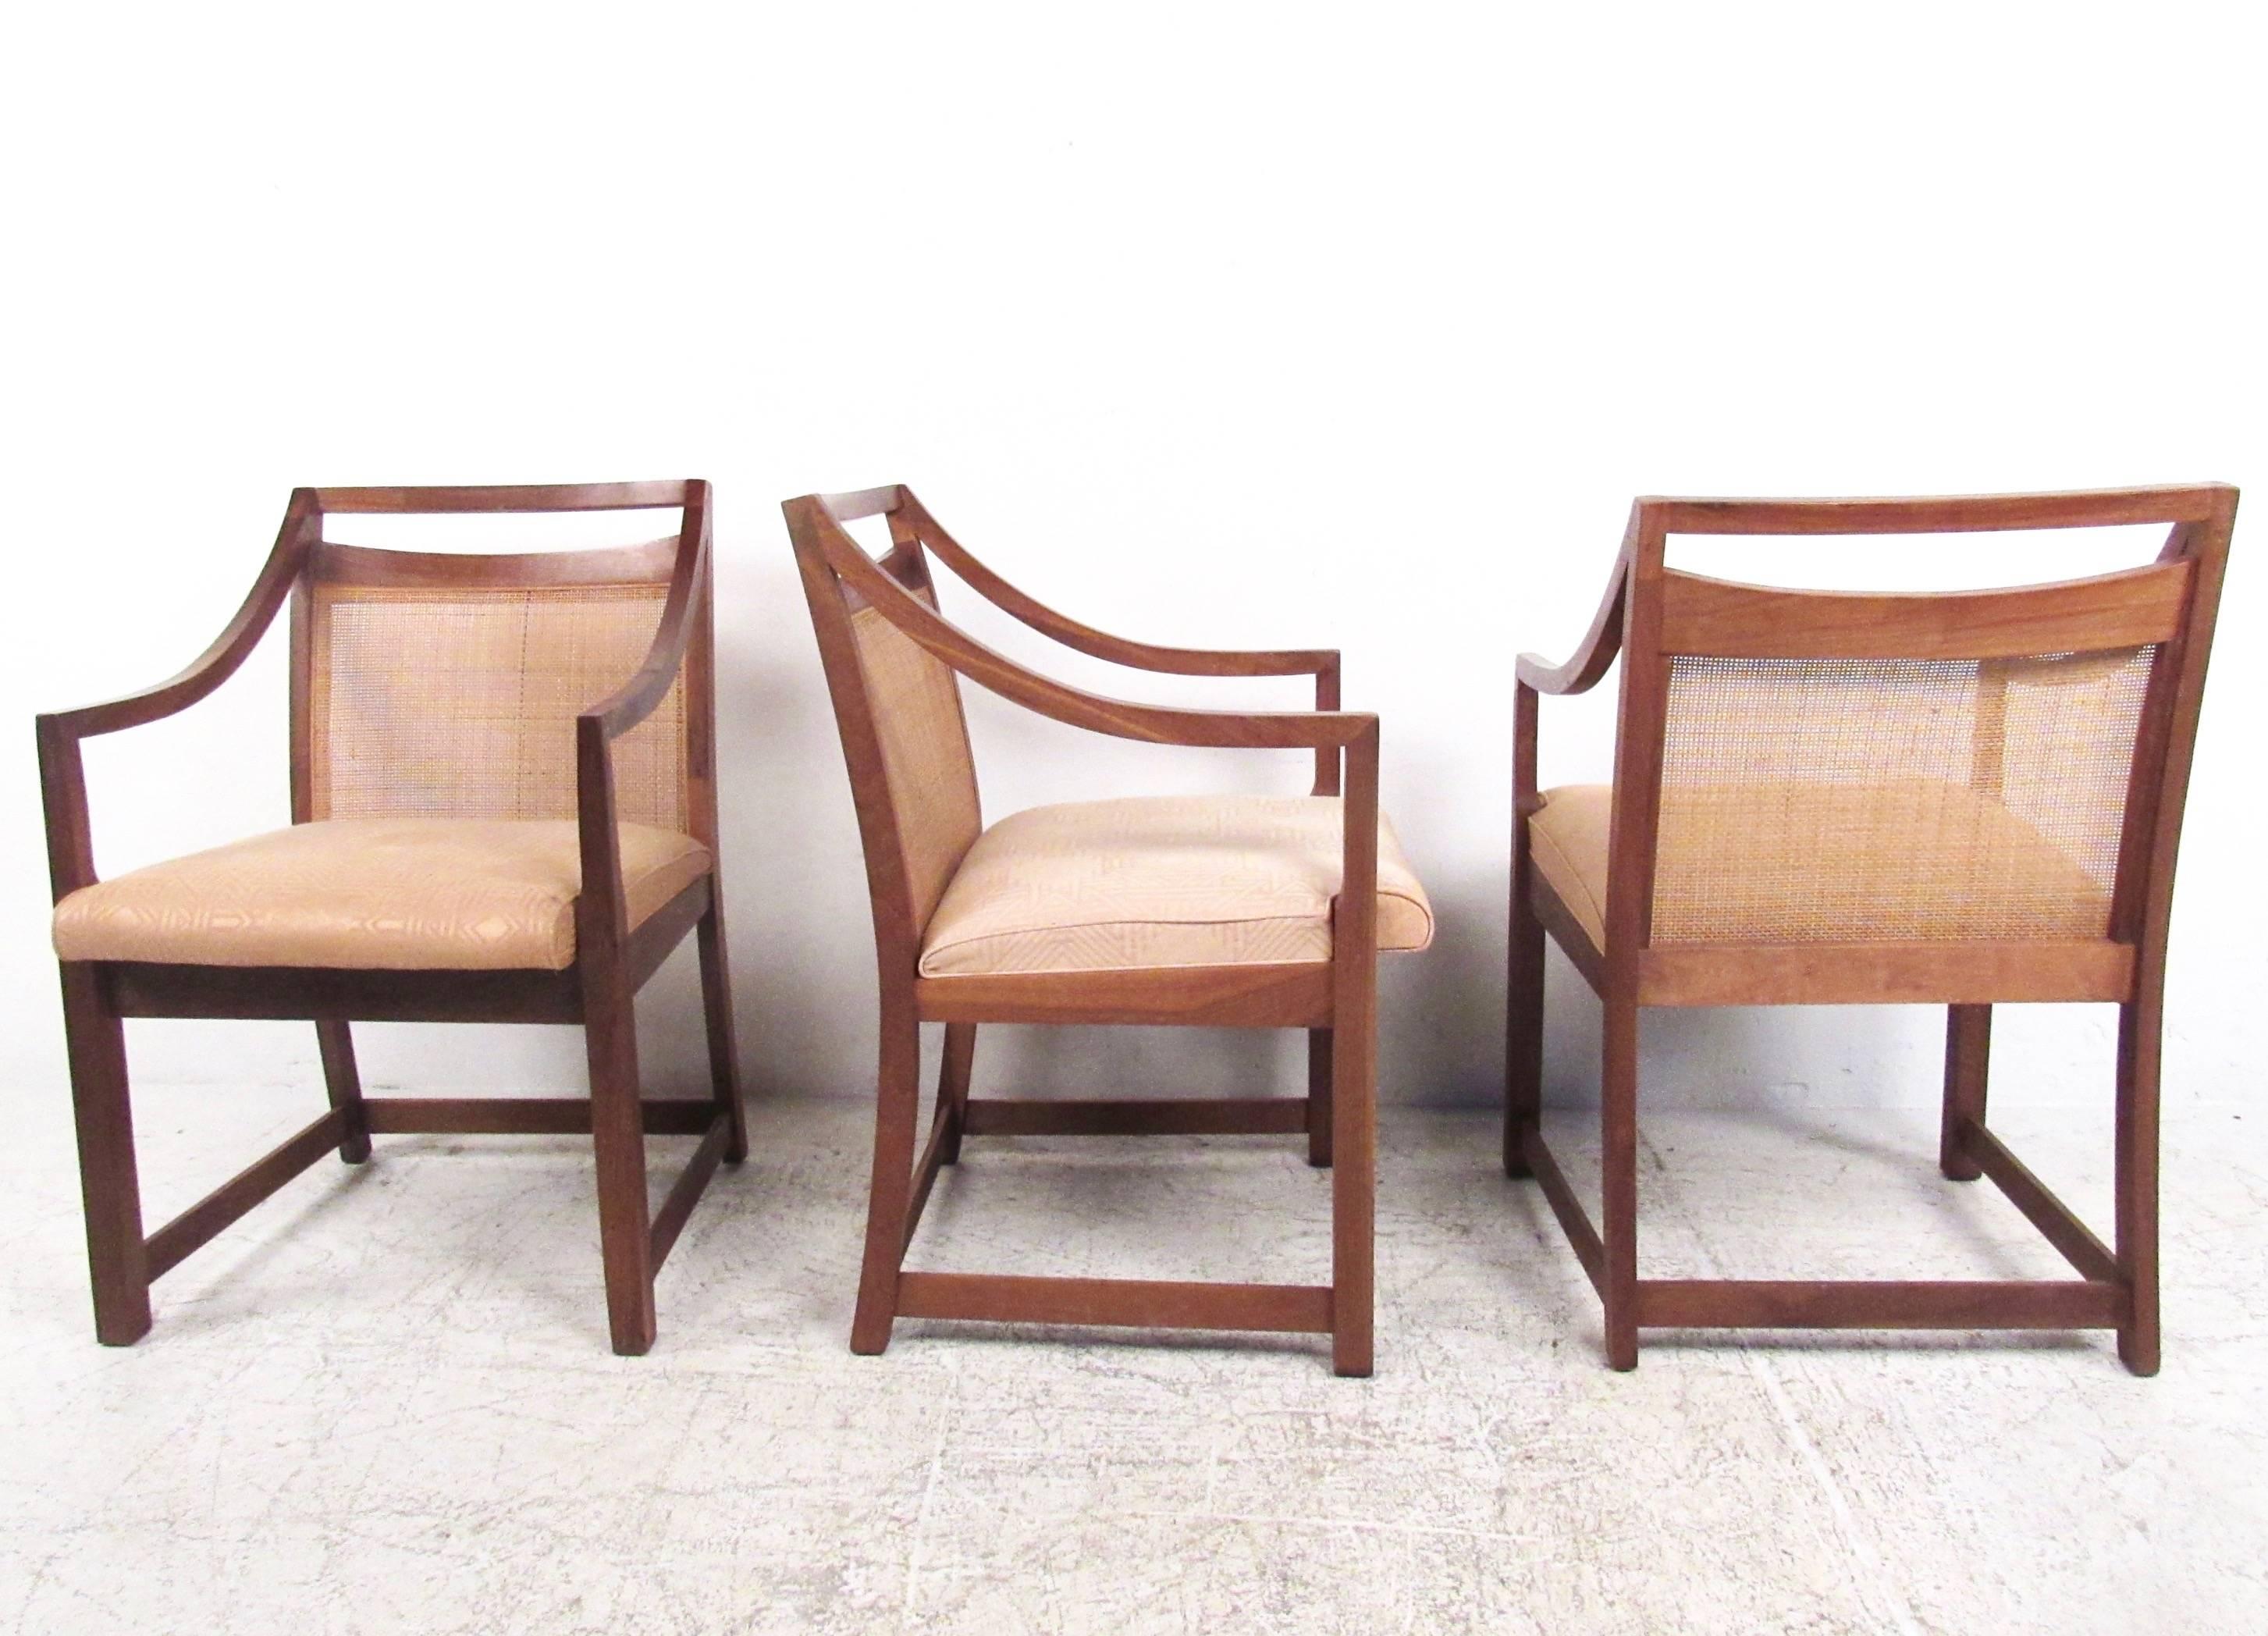 This set of eight vintage dining chairs features quality construction and unique cane seat backs. Sloped armrests accentuate the style of the set, while upholstered seats ensure comfort in any situation. Please confirm item location (NY or NJ).